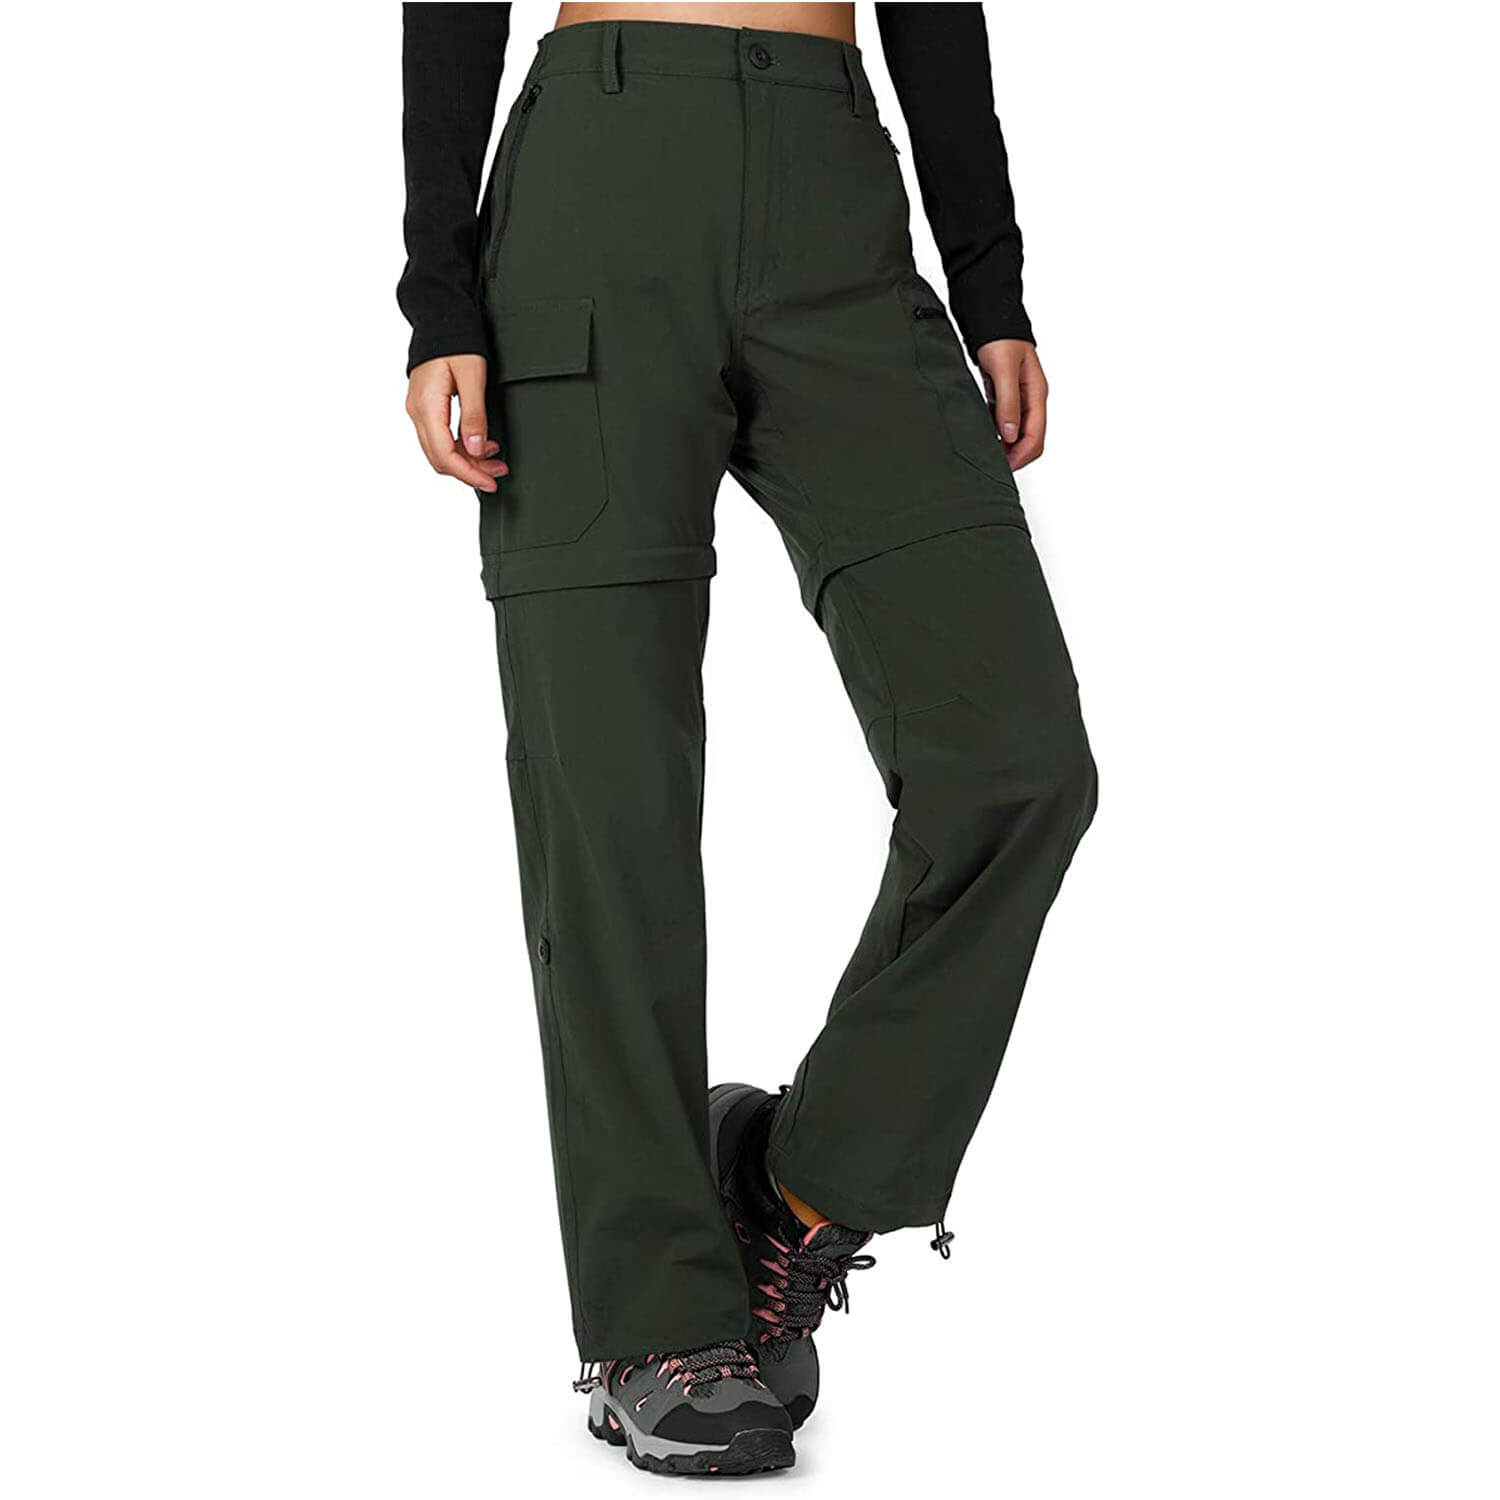  Cycorld Women's-Hiking-Pants-Convertible Quick-Dry-Stretch-Lightweight  Zip-Off Outdoor Pants with 5 Deep Pocket（Army Green, X-Small : Clothing,  Shoes & Jewelry